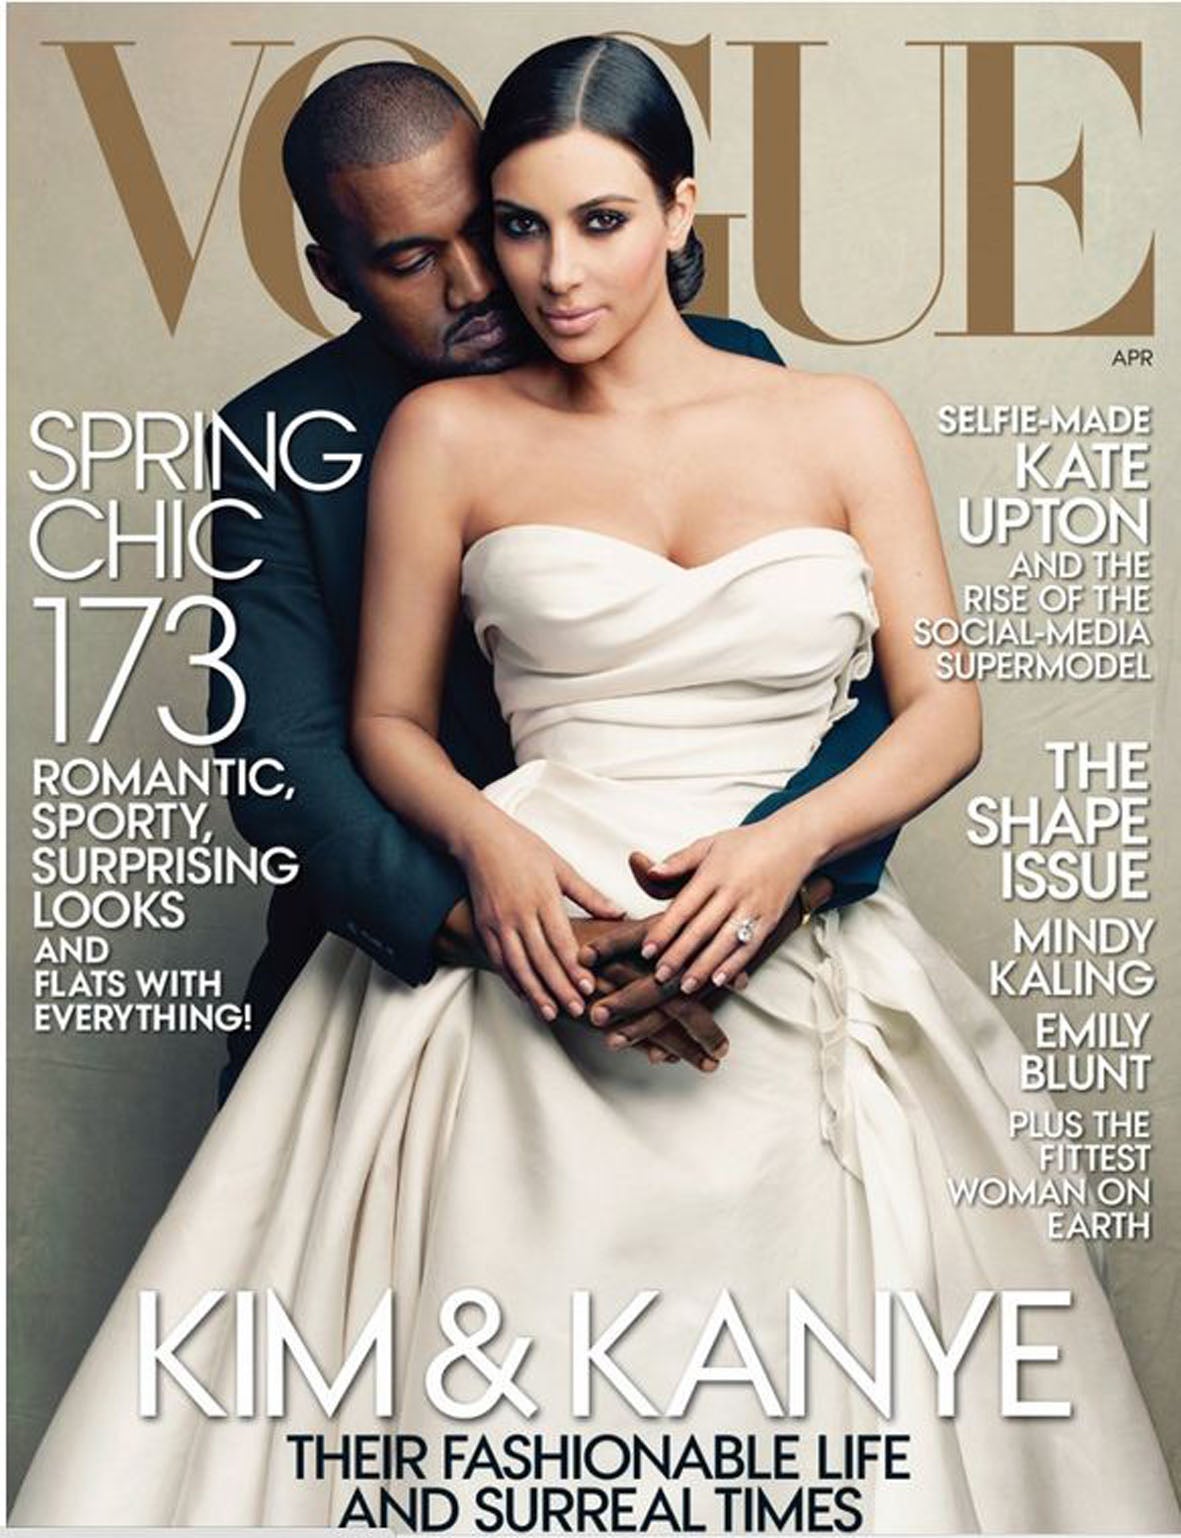 The cover in full, as shot by Annie Leibovitz for the April 2014 edition of Vogue US